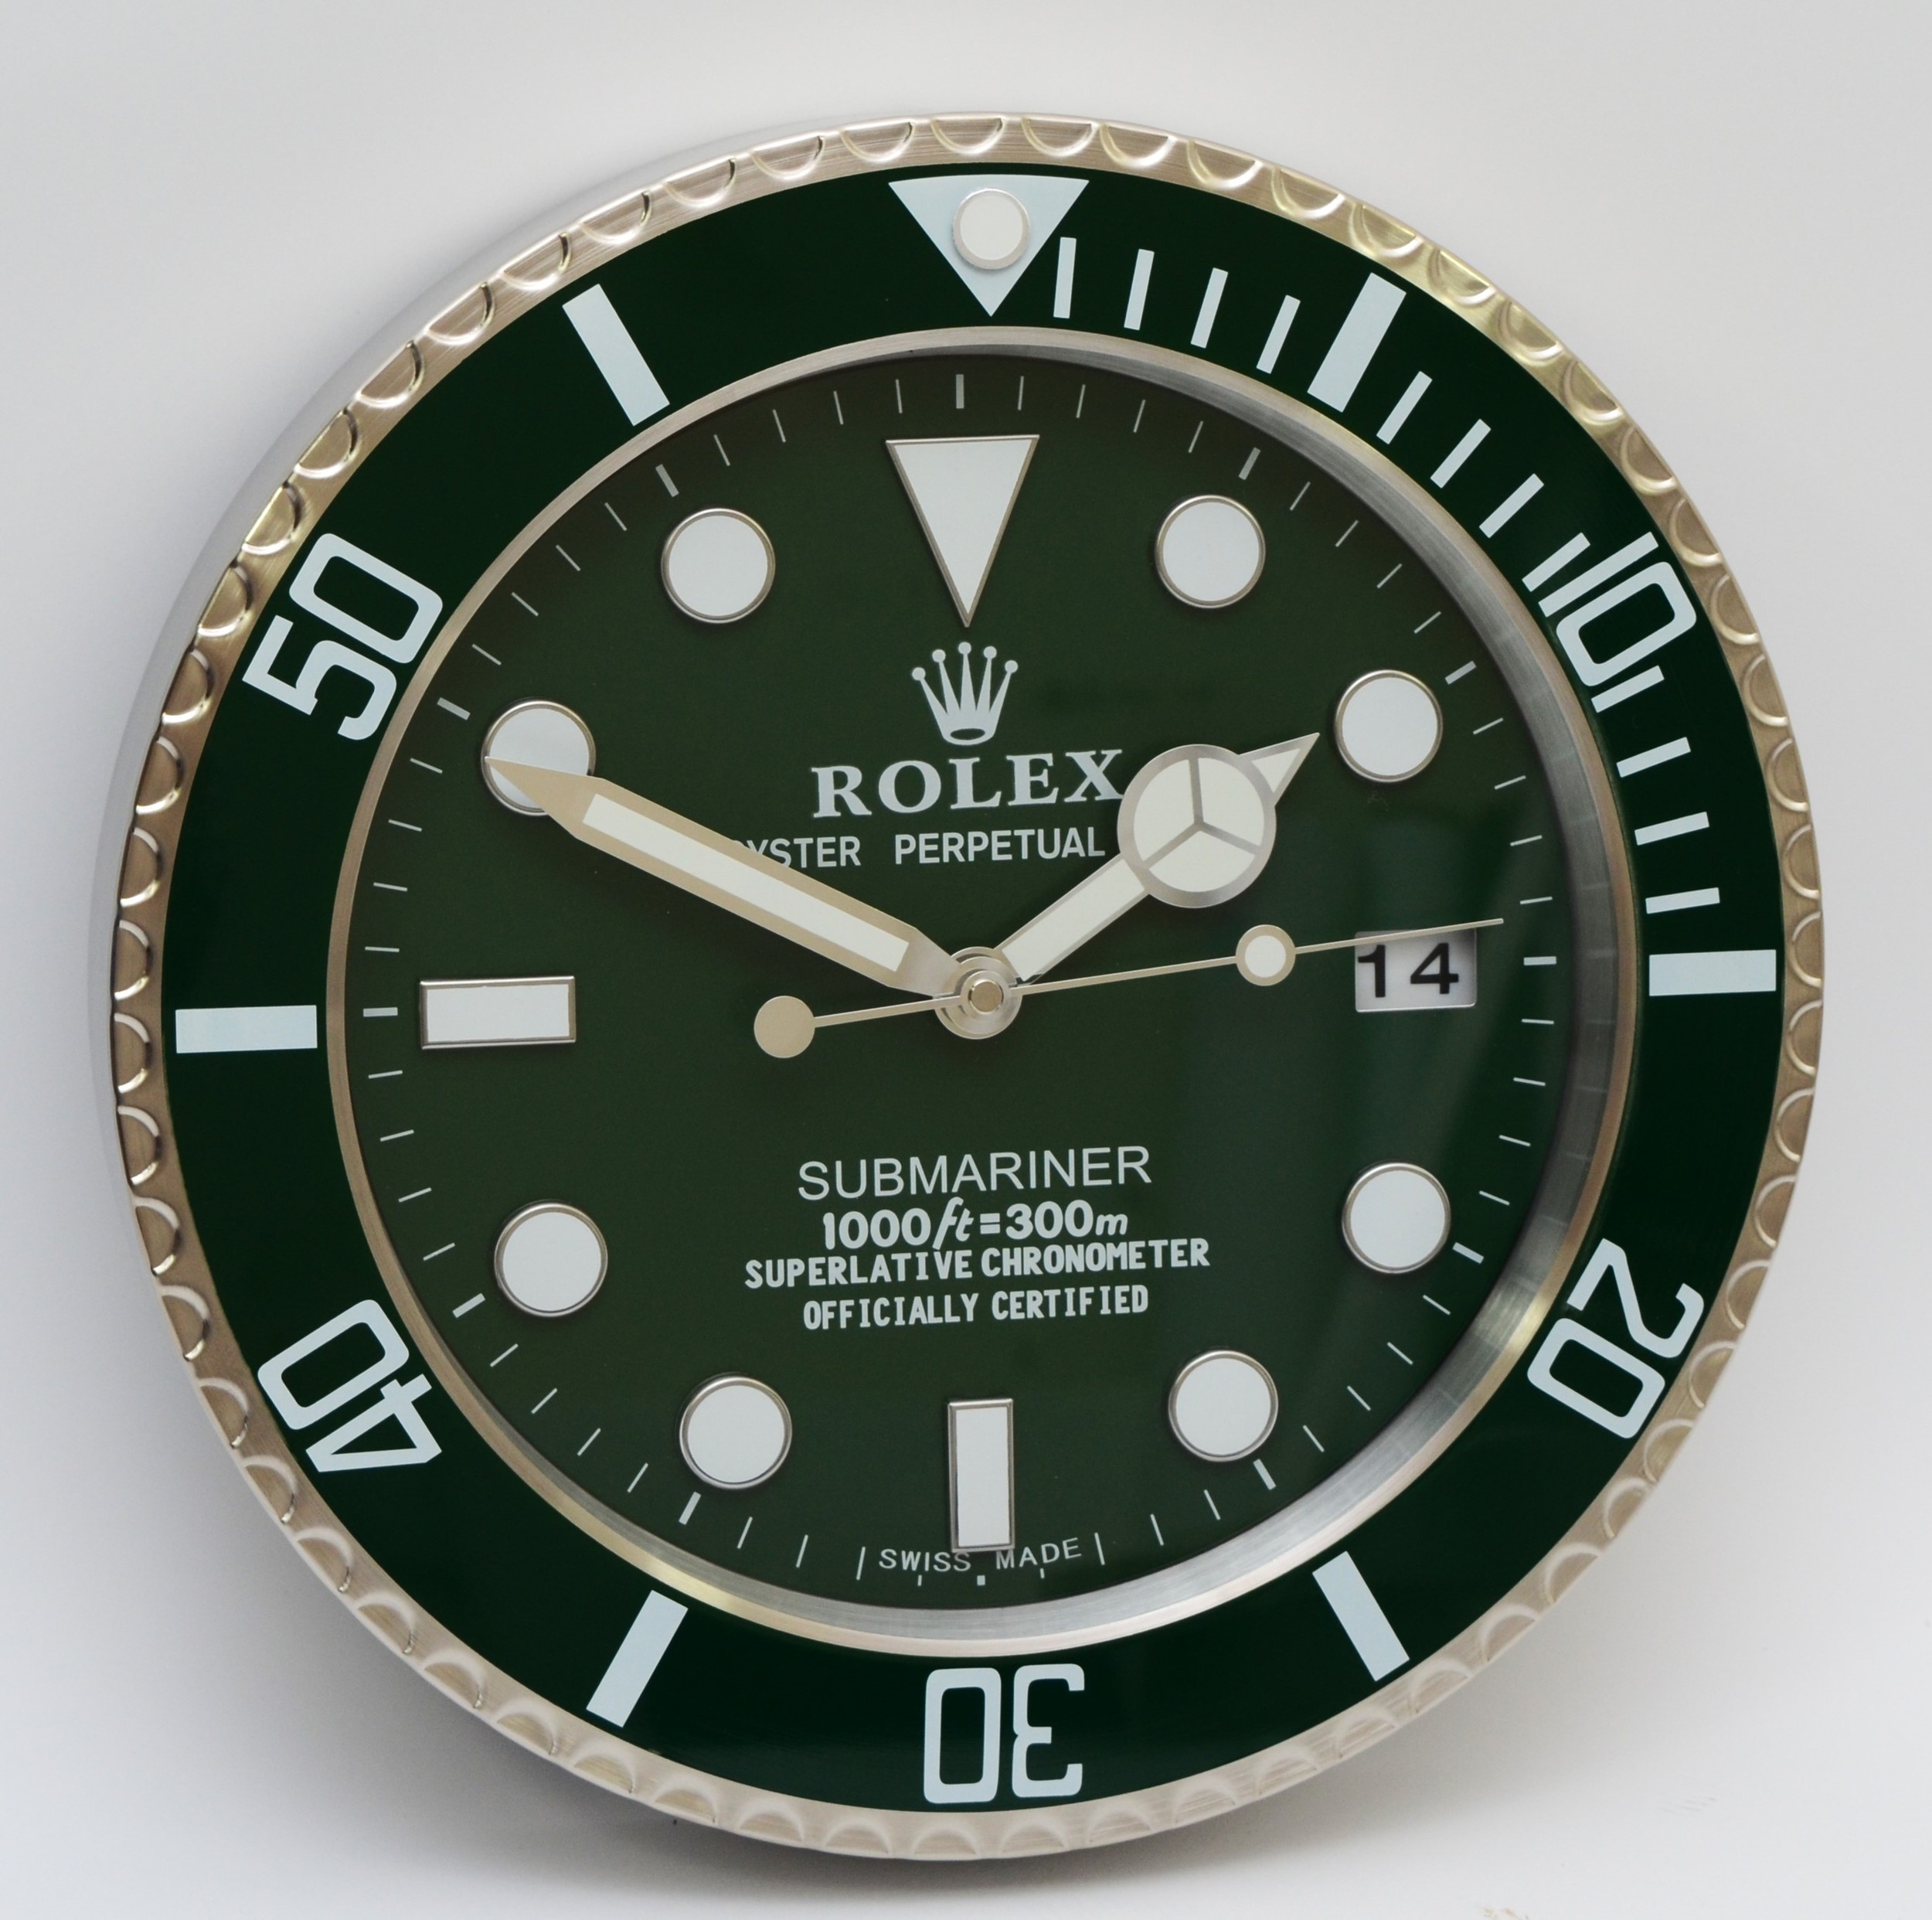 A 'Rolex' style advertising wall clock, green dial reads 'Rolex Oyster Perpetual Submariner'